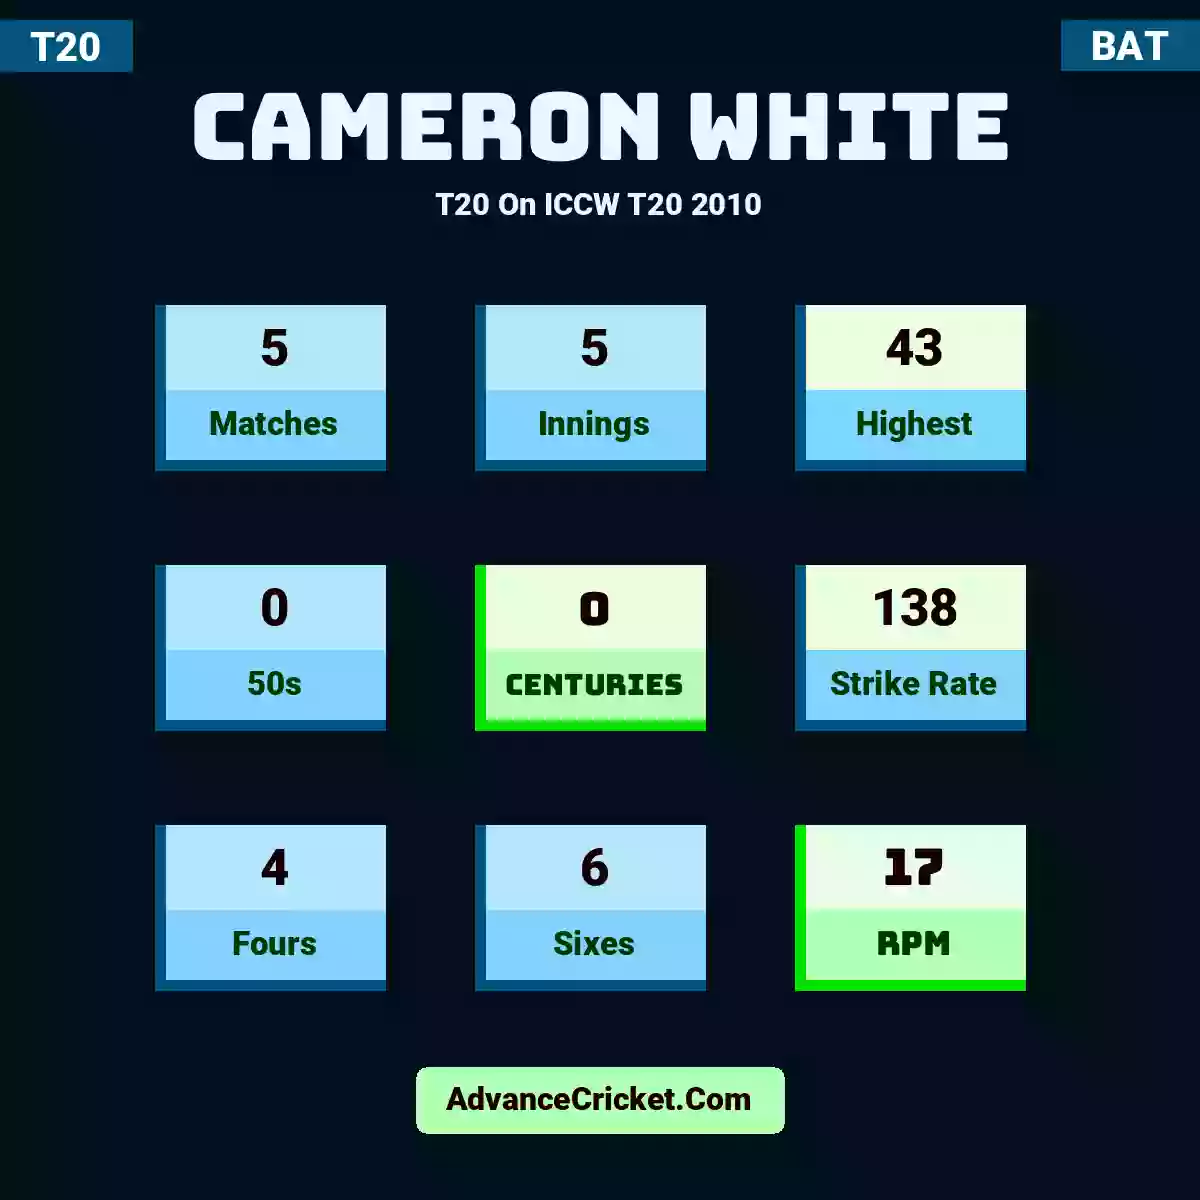 Cameron White T20  On ICCW T20 2010, Cameron White played 5 matches, scored 43 runs as highest, 0 half-centuries, and 0 centuries, with a strike rate of 138. C.White hit 4 fours and 6 sixes, with an RPM of 17.